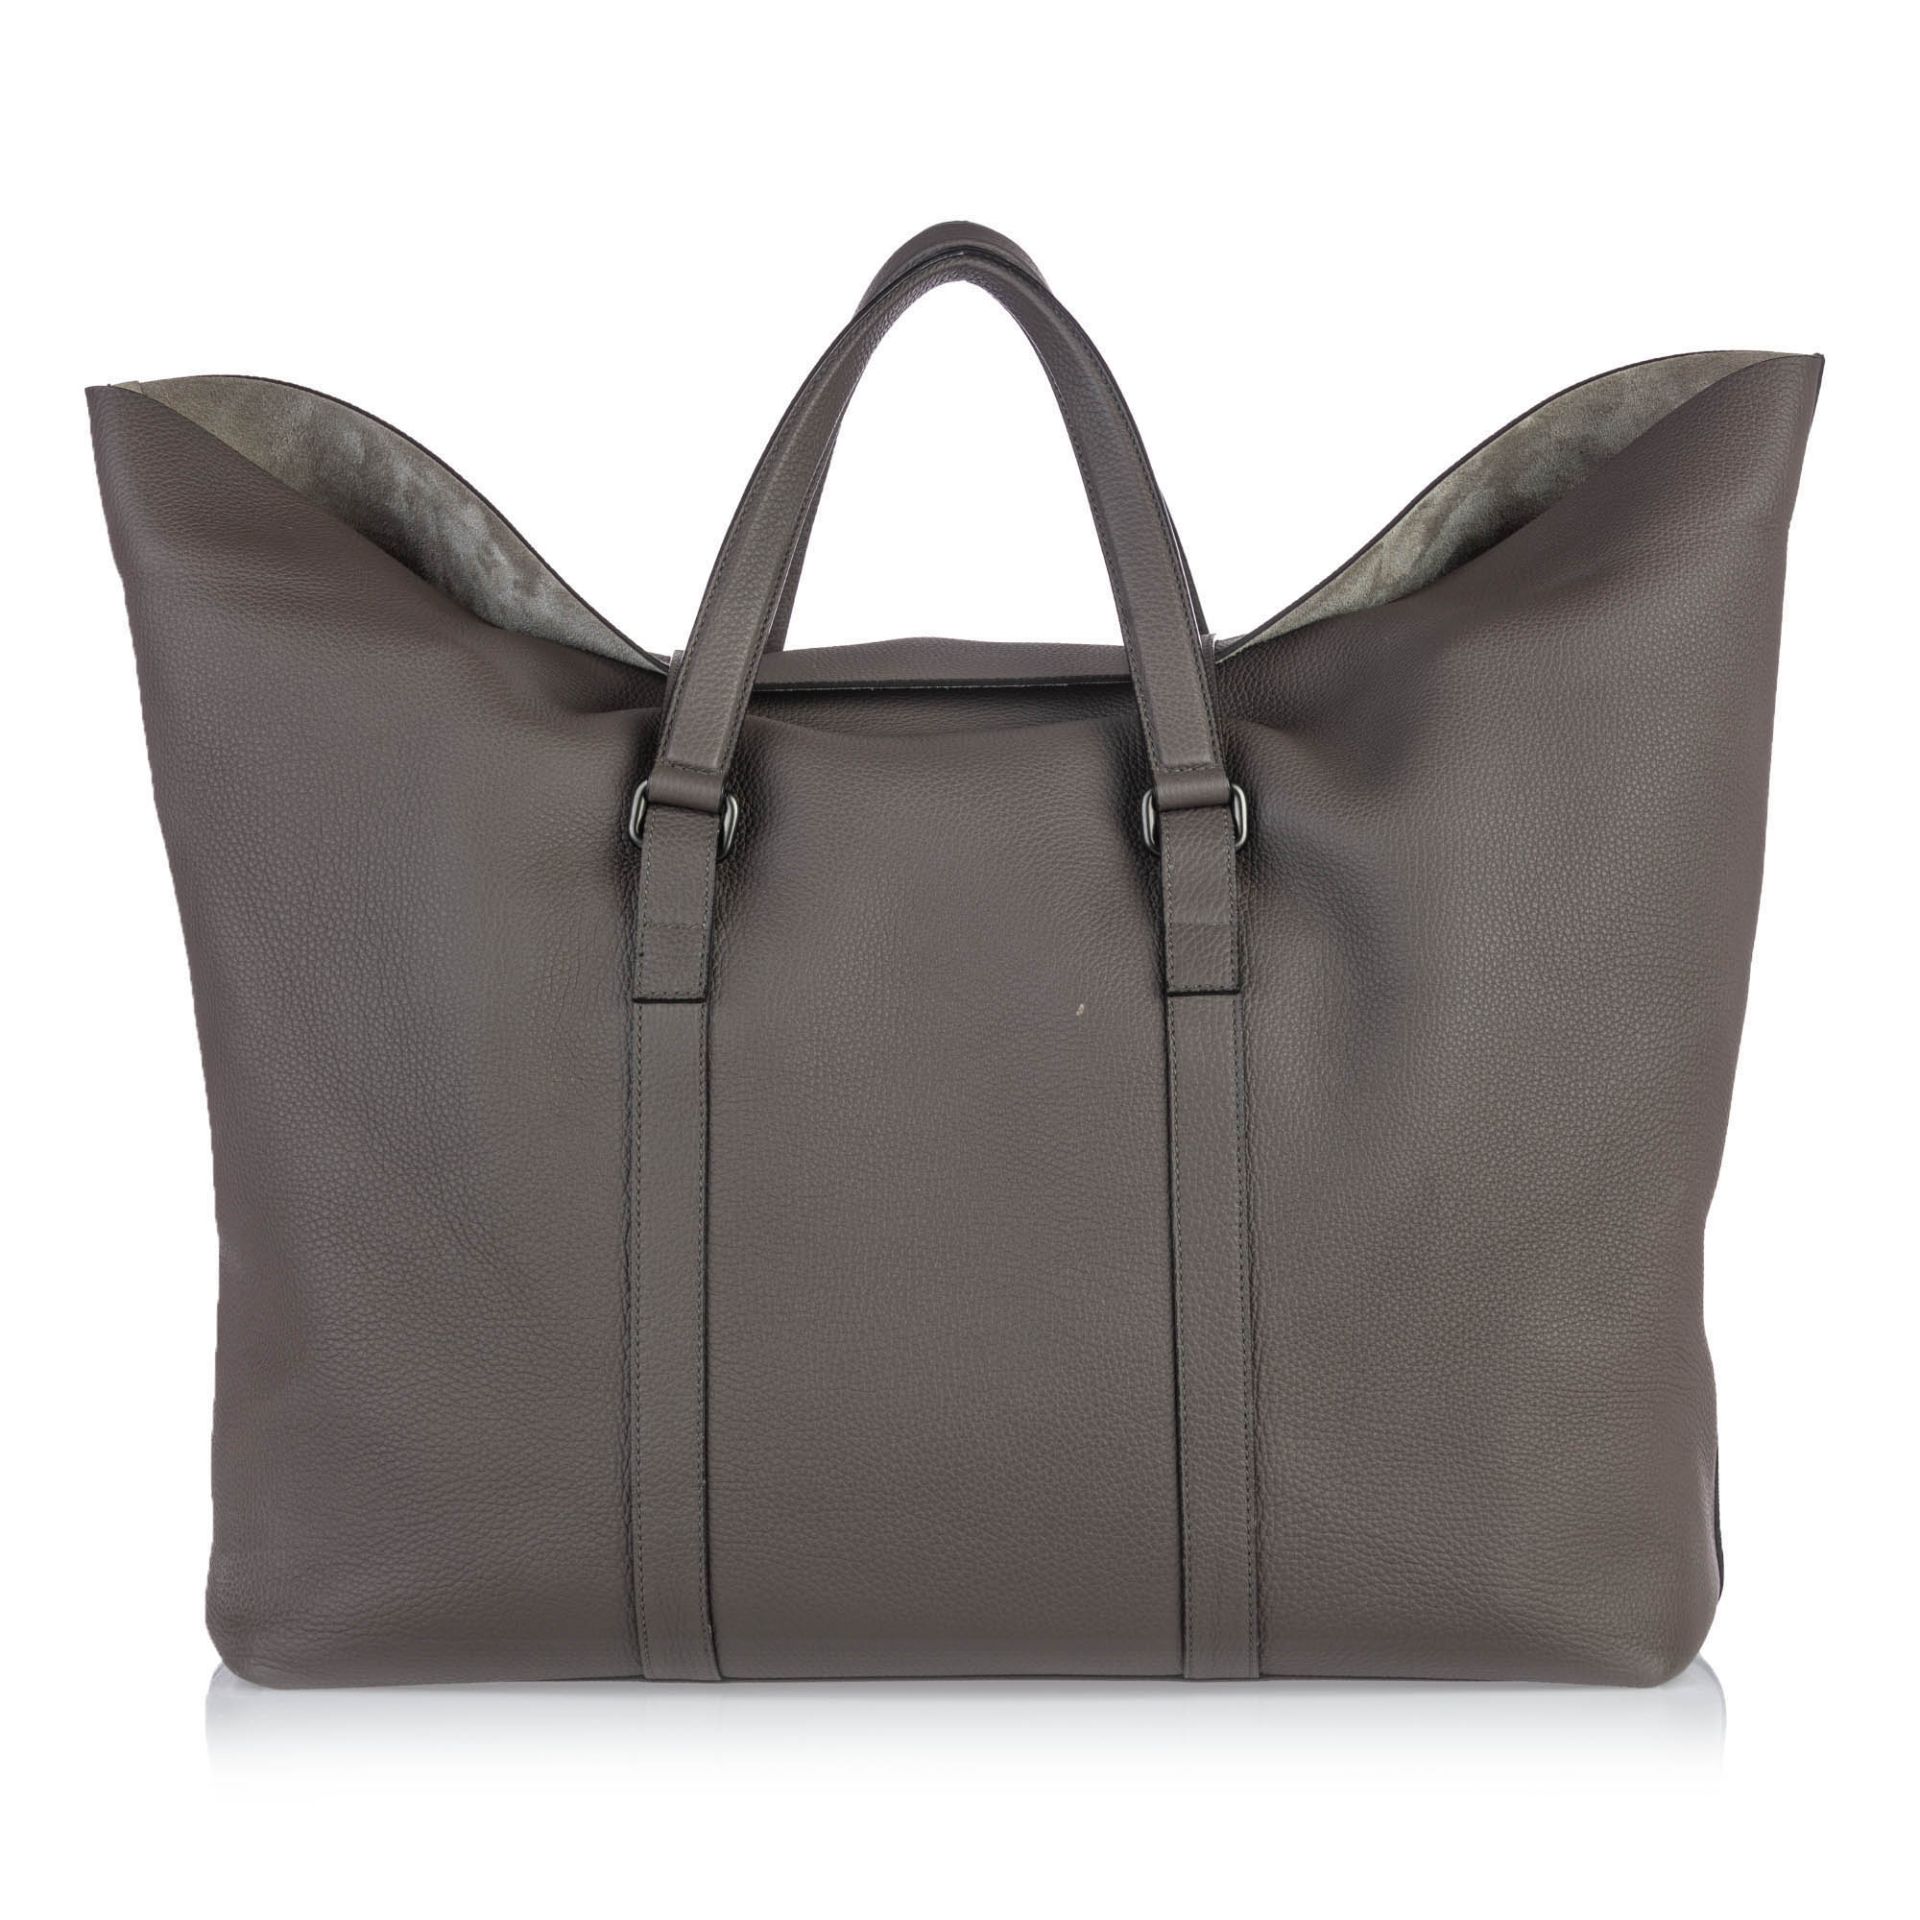 Gucci Leather Grand Prix Weekend Duffel Bag - Image 7 of 8